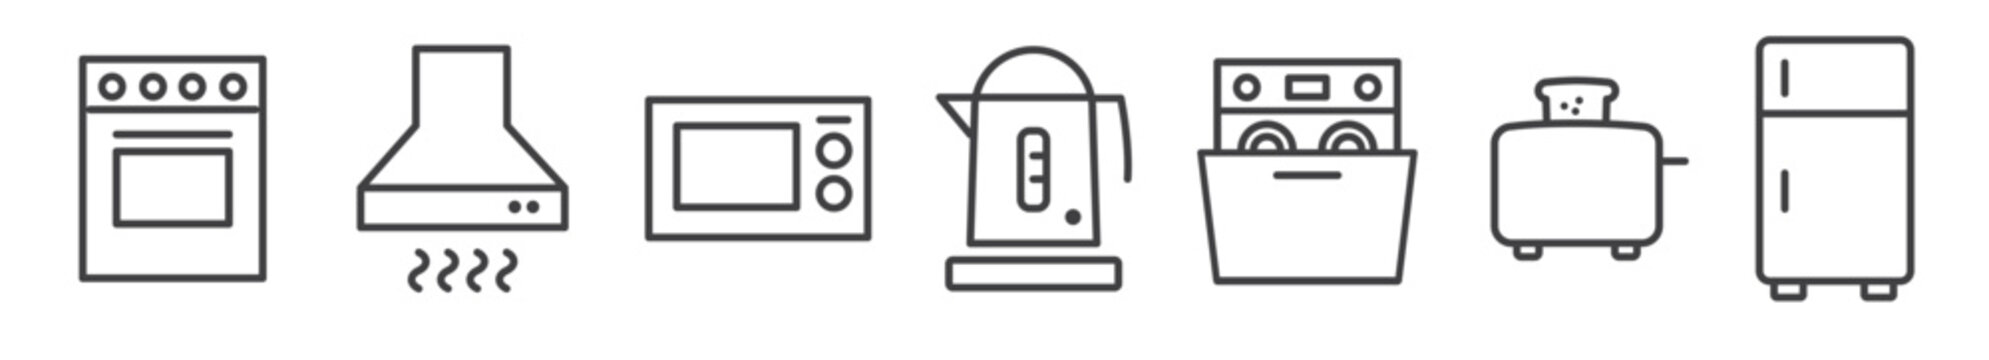 kitchen appliances and white goods - thin line icon collection on white background